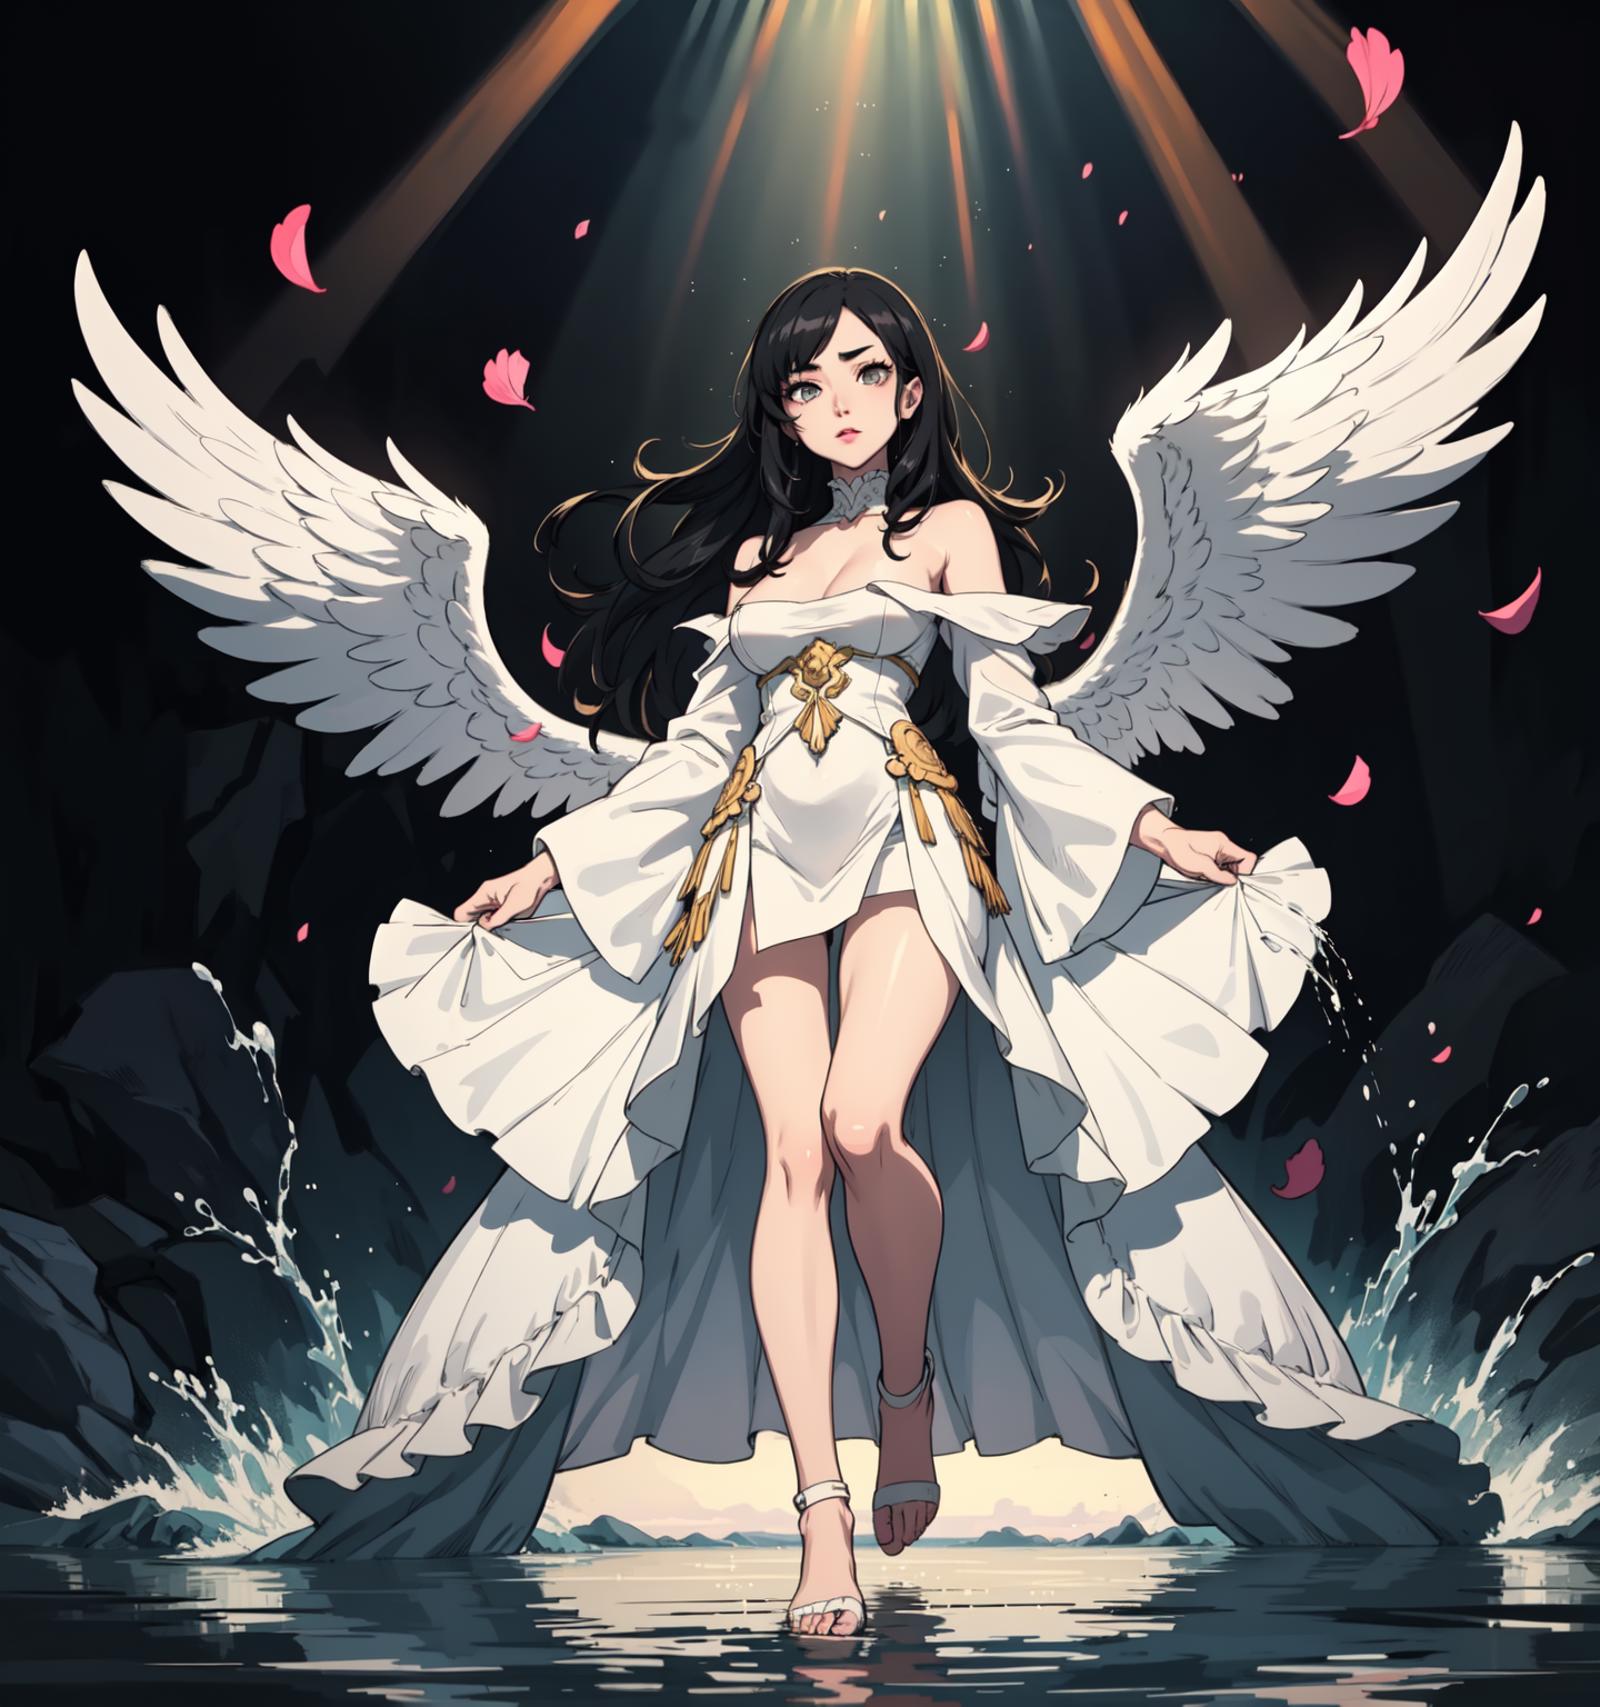 Anime-style art of a woman with wings standing in water, wearing a white dress with flowing skirt.